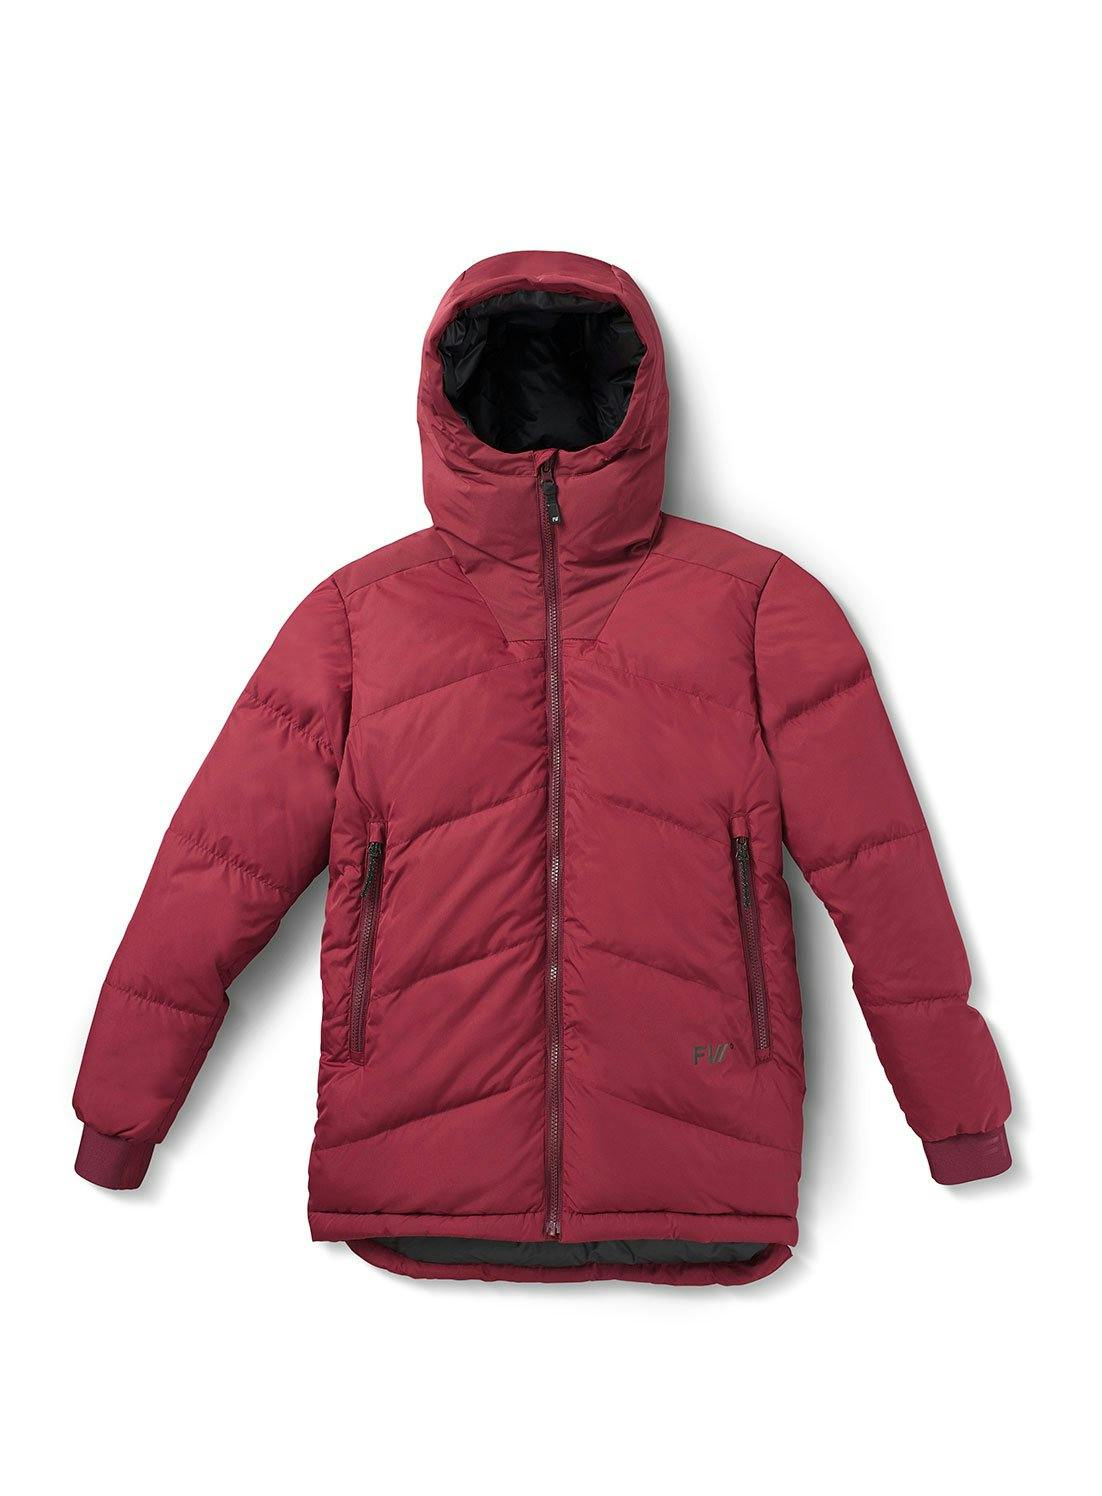 FW Women's ROOT Down Insulated Jacket